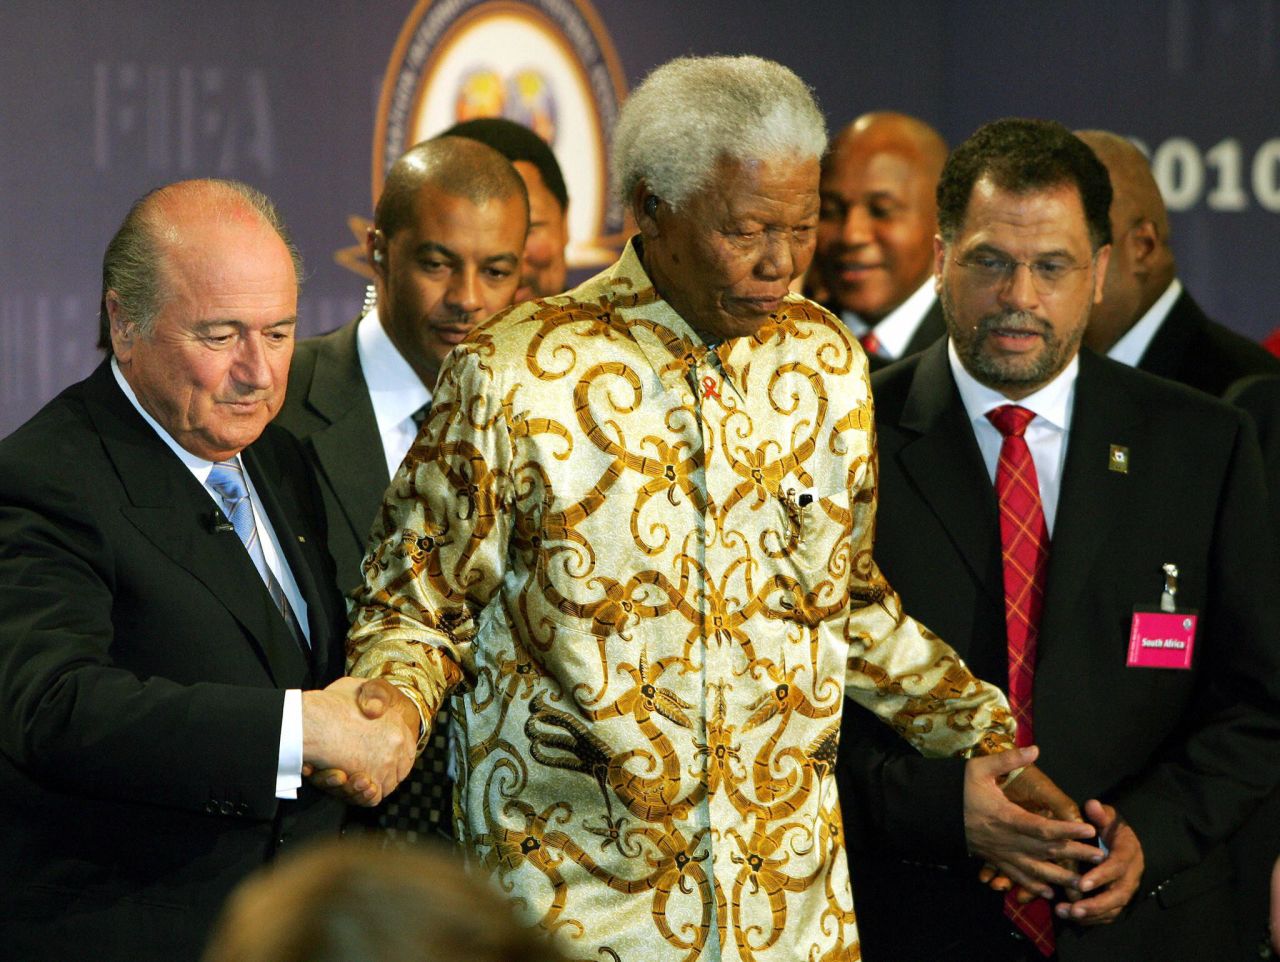 FIFA President Sepp Blatter seen here with Mandela during preparations for the 2010 World Cup. Blatter paid a glowing tribute to the former South African President on Thursday. "Nelson Mandela will stay in our hearts forever. The memories of his remarkable fight against oppression, his incredible charisma and his positive values will live on in us and with us," Blatter said in a statement.  